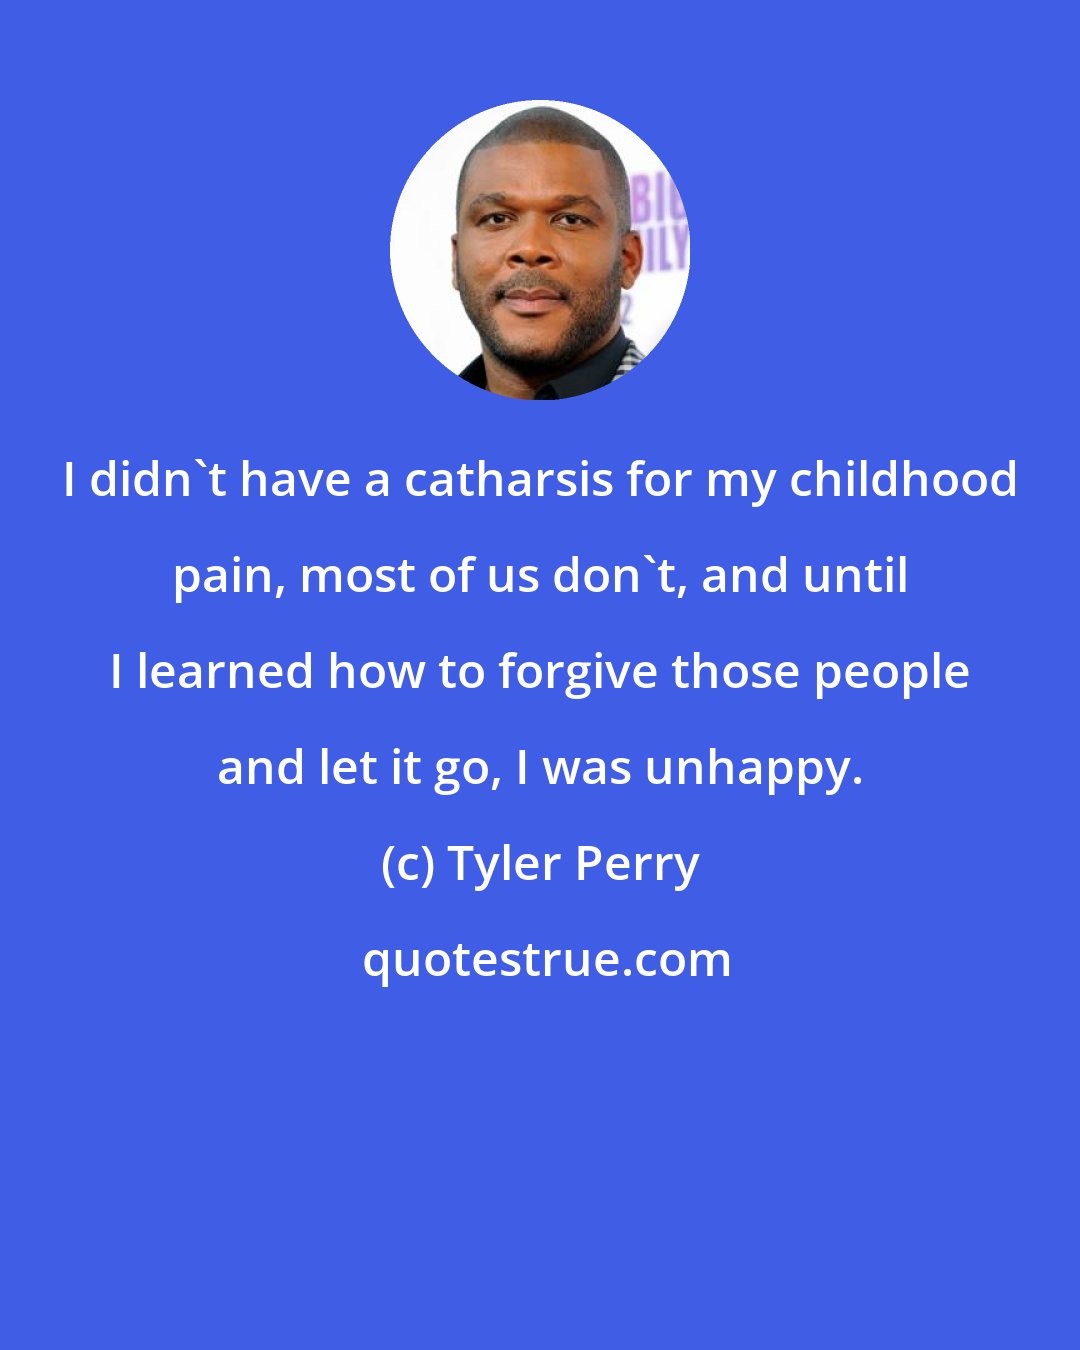 Tyler Perry: I didn't have a catharsis for my childhood pain, most of us don't, and until I learned how to forgive those people and let it go, I was unhappy.